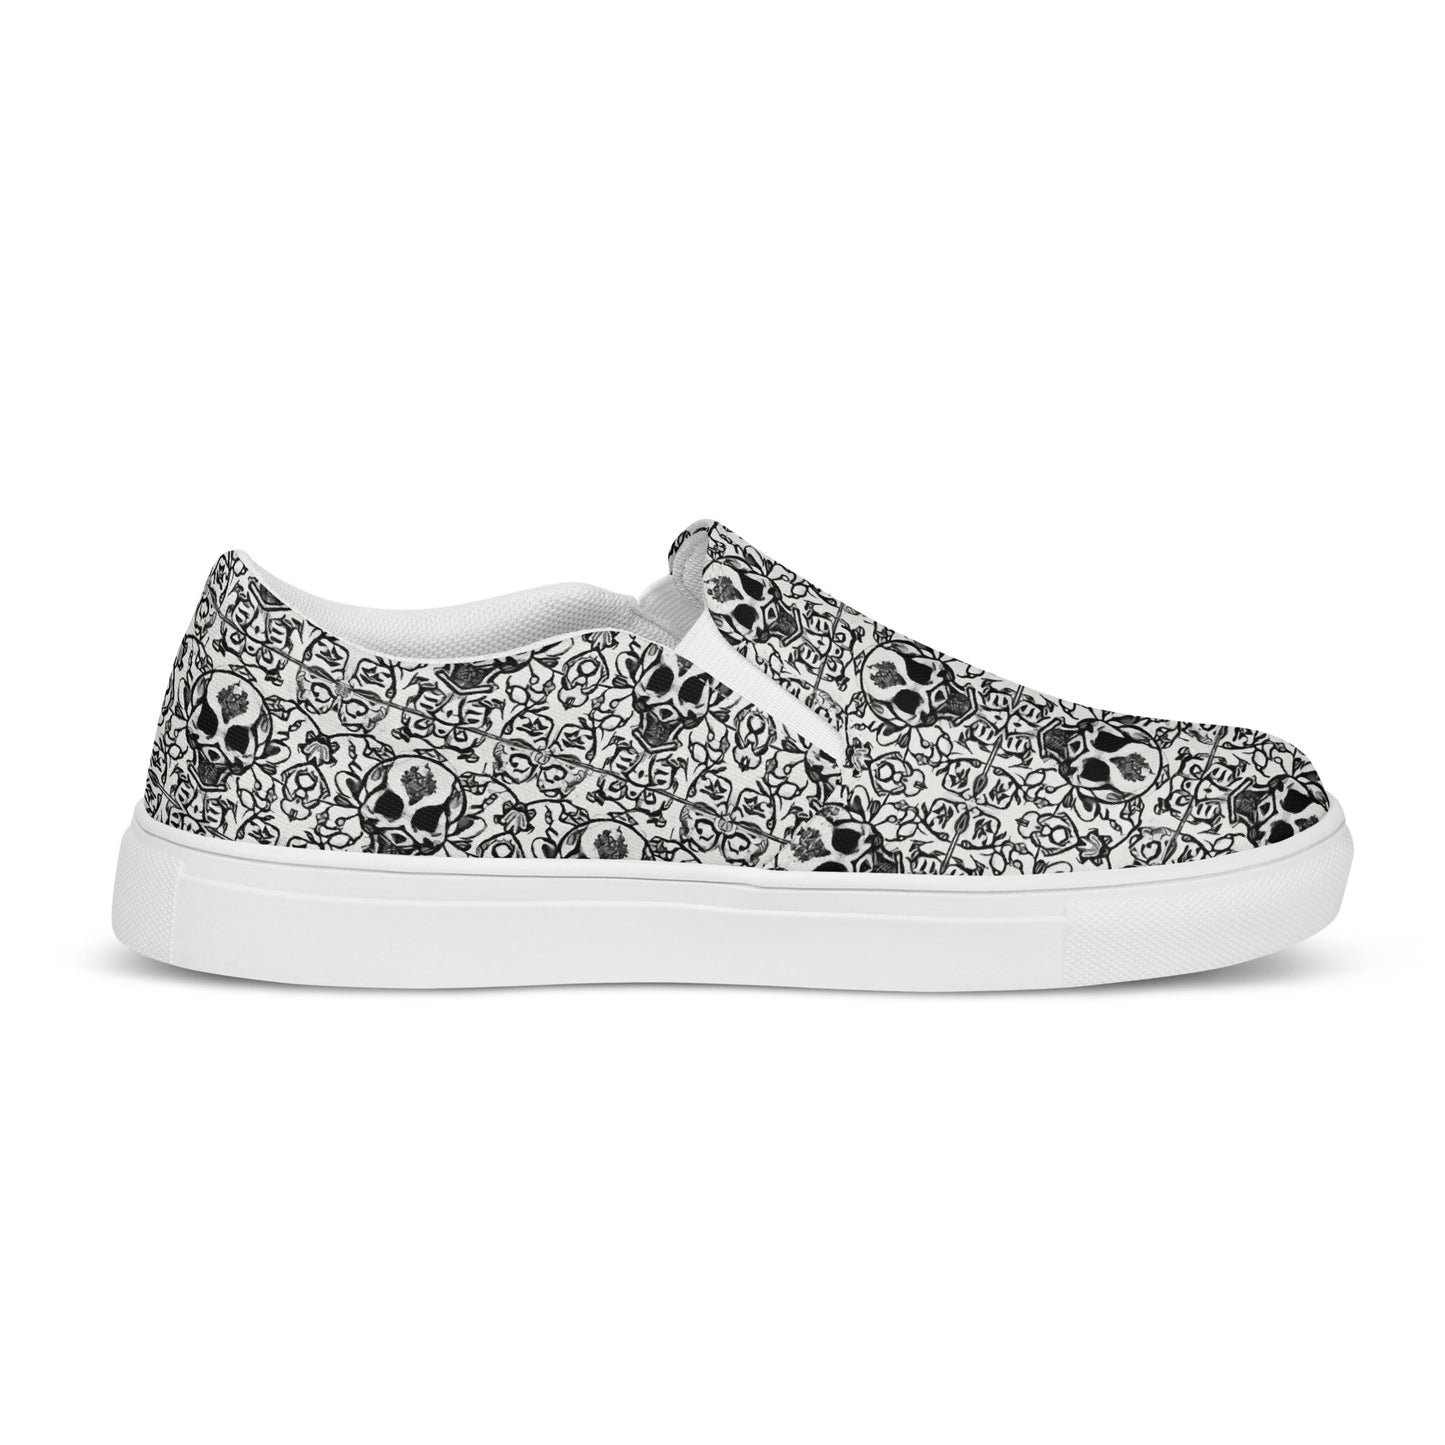 Women’s Skull Cathedral Slip-On Shoes